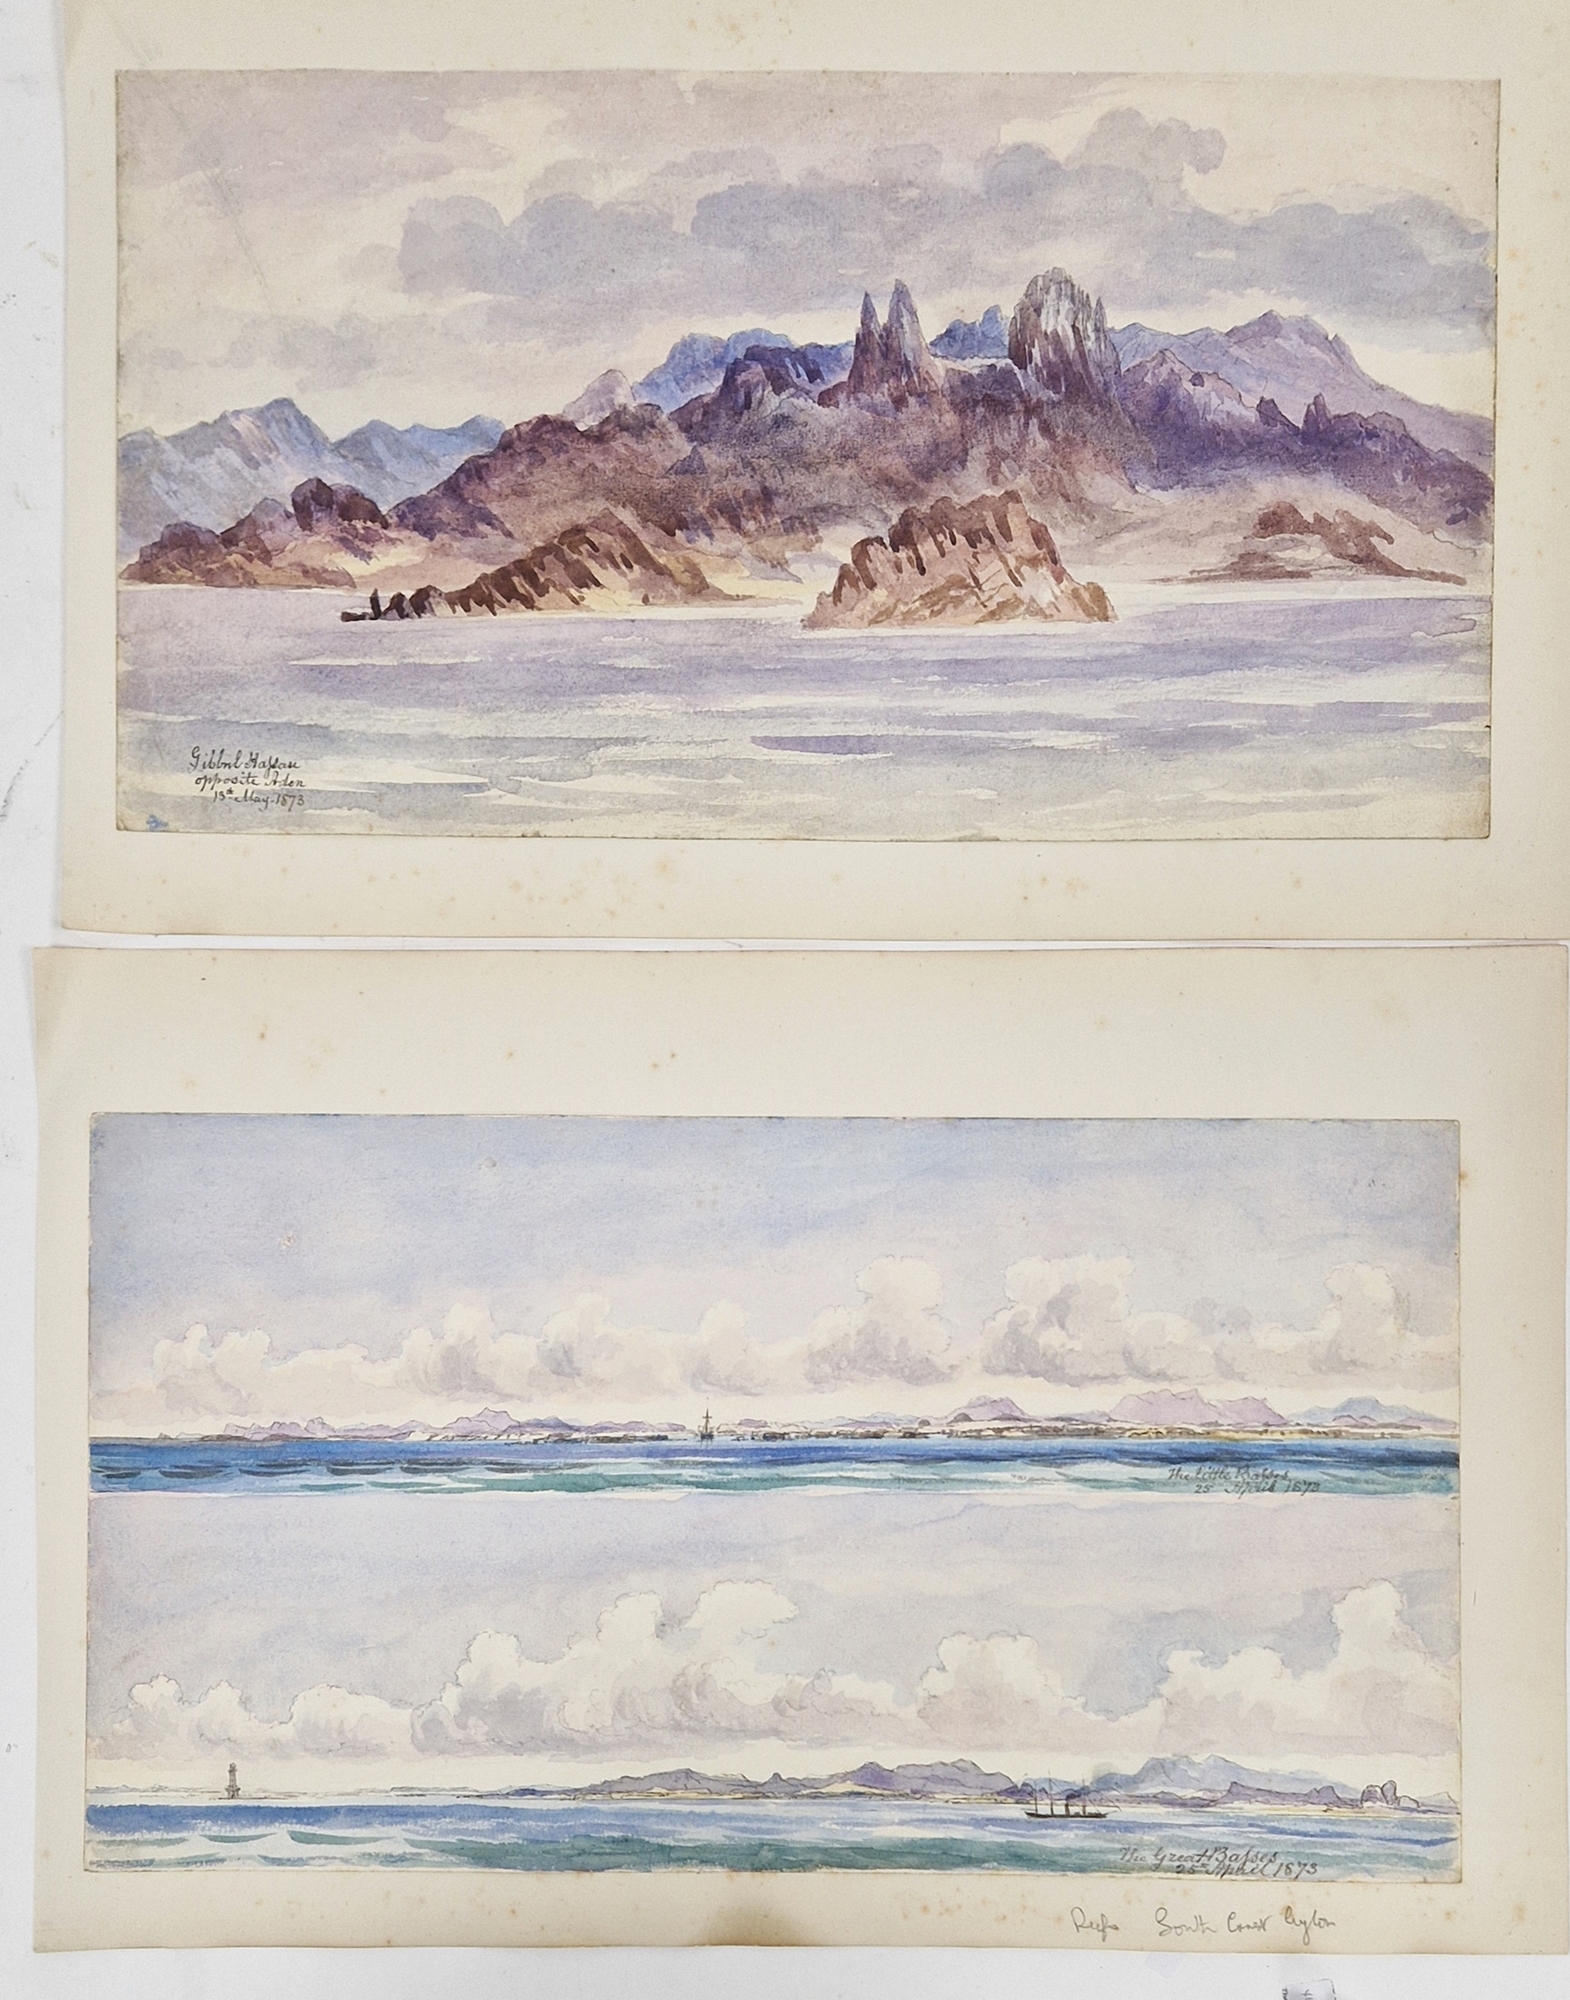 Watercolour drawings - collection Attrib. A H. Walter " A Passage from India to England 1873" - Image 13 of 13